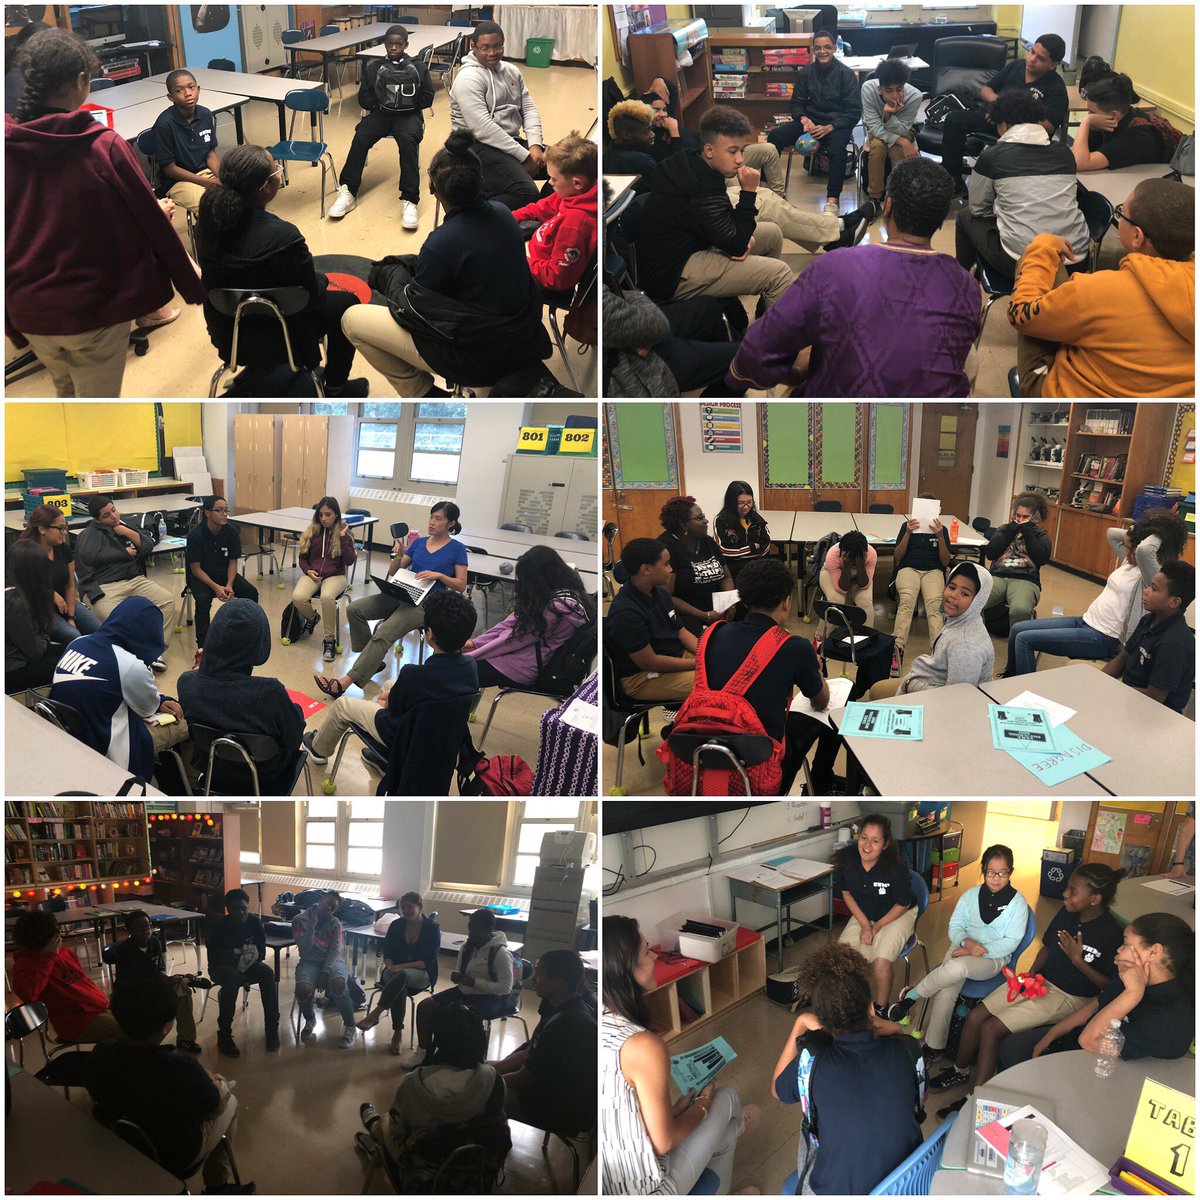 We love Circles time at UNMS! #Buildingcommunity #SELinAction #SELmatters #unmsrocks